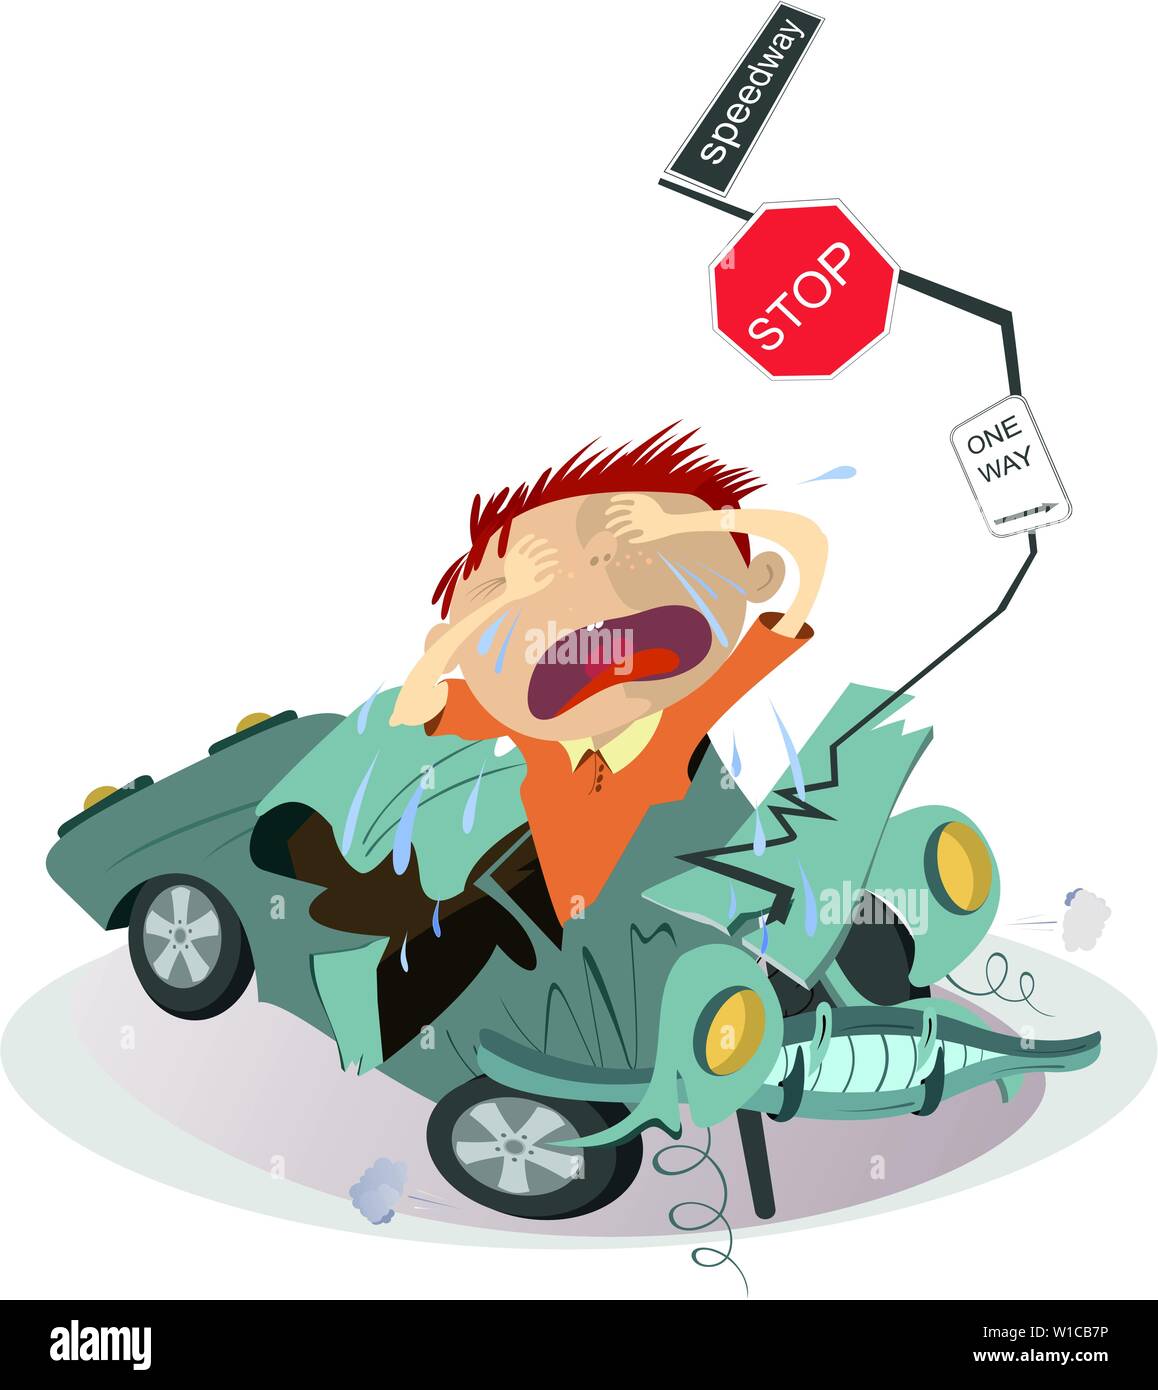 Road accident and sobbing man in the crashed car illustration. Upset crying man and car rams into the road signs isolated illustration Stock Vector